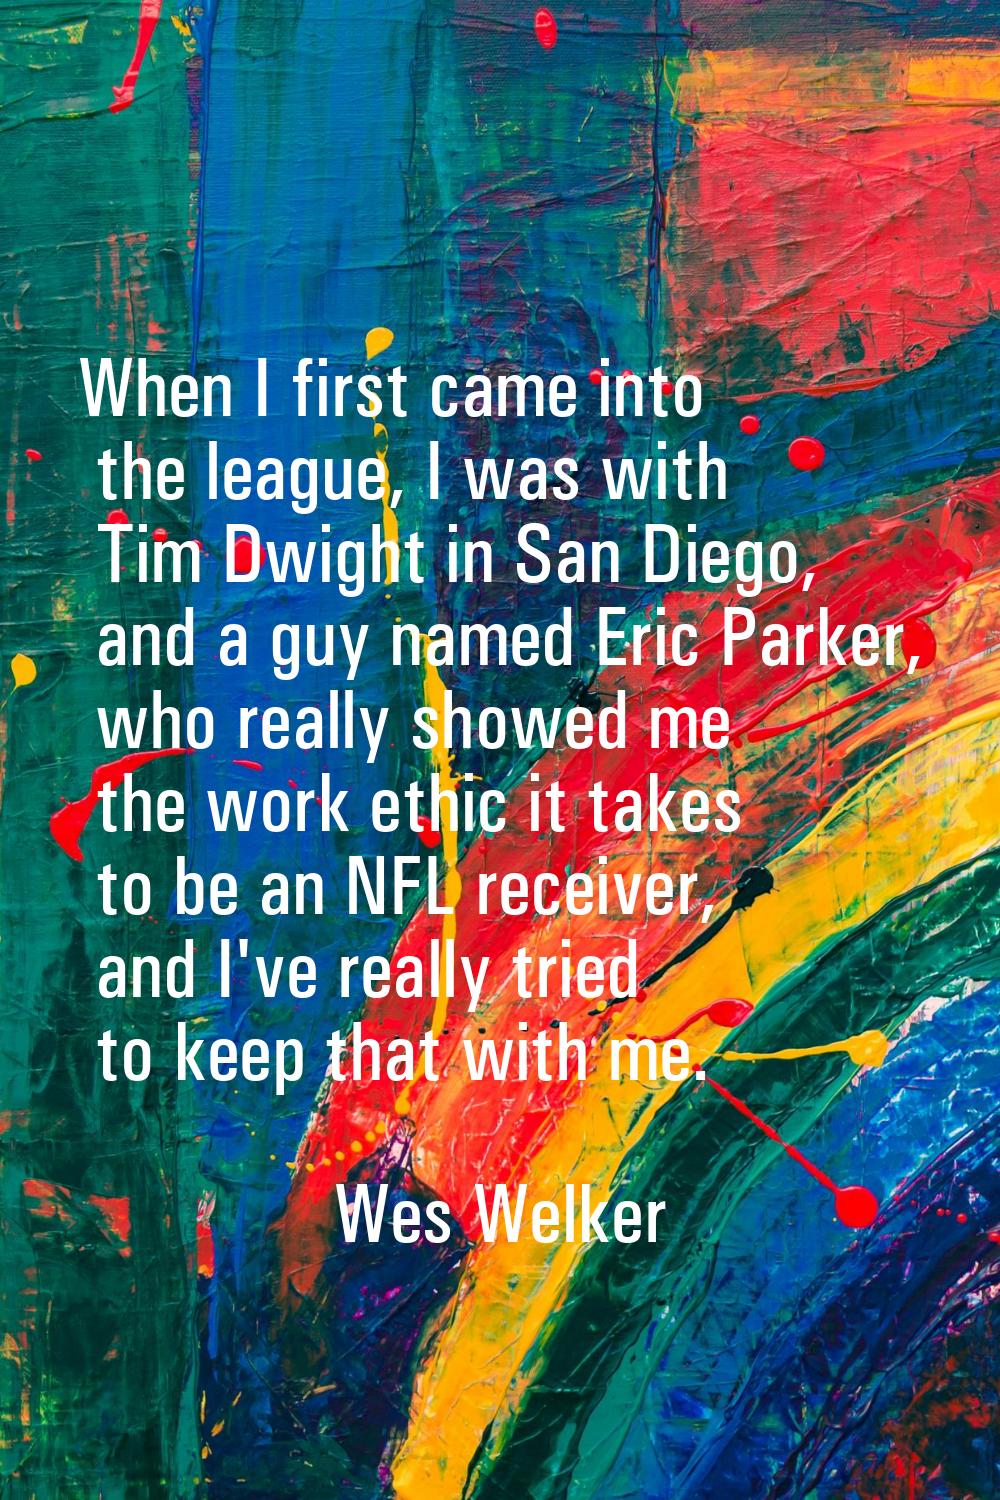 When I first came into the league, I was with Tim Dwight in San Diego, and a guy named Eric Parker,